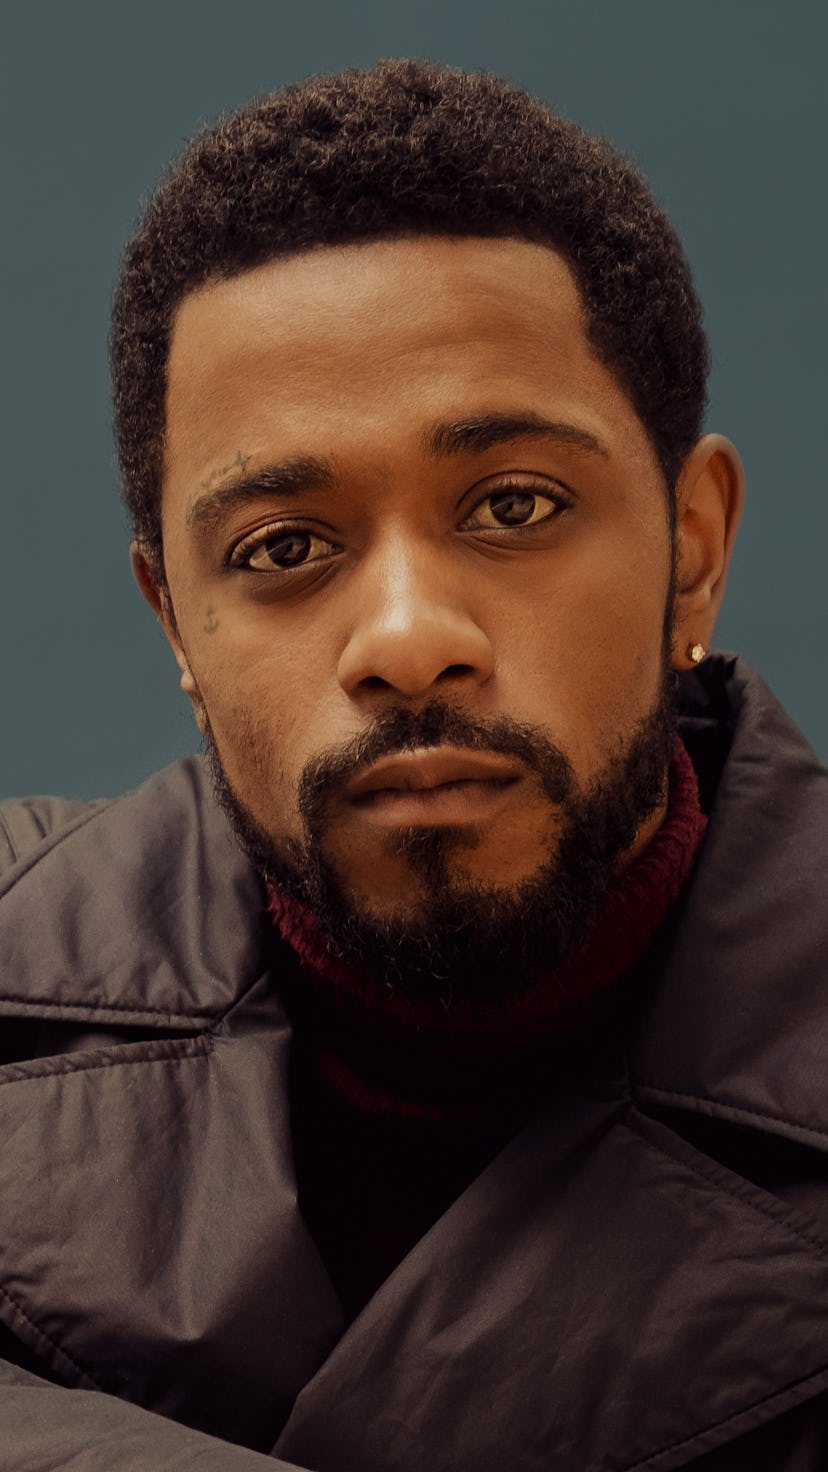 The Photograph star Lakeith Stanfield